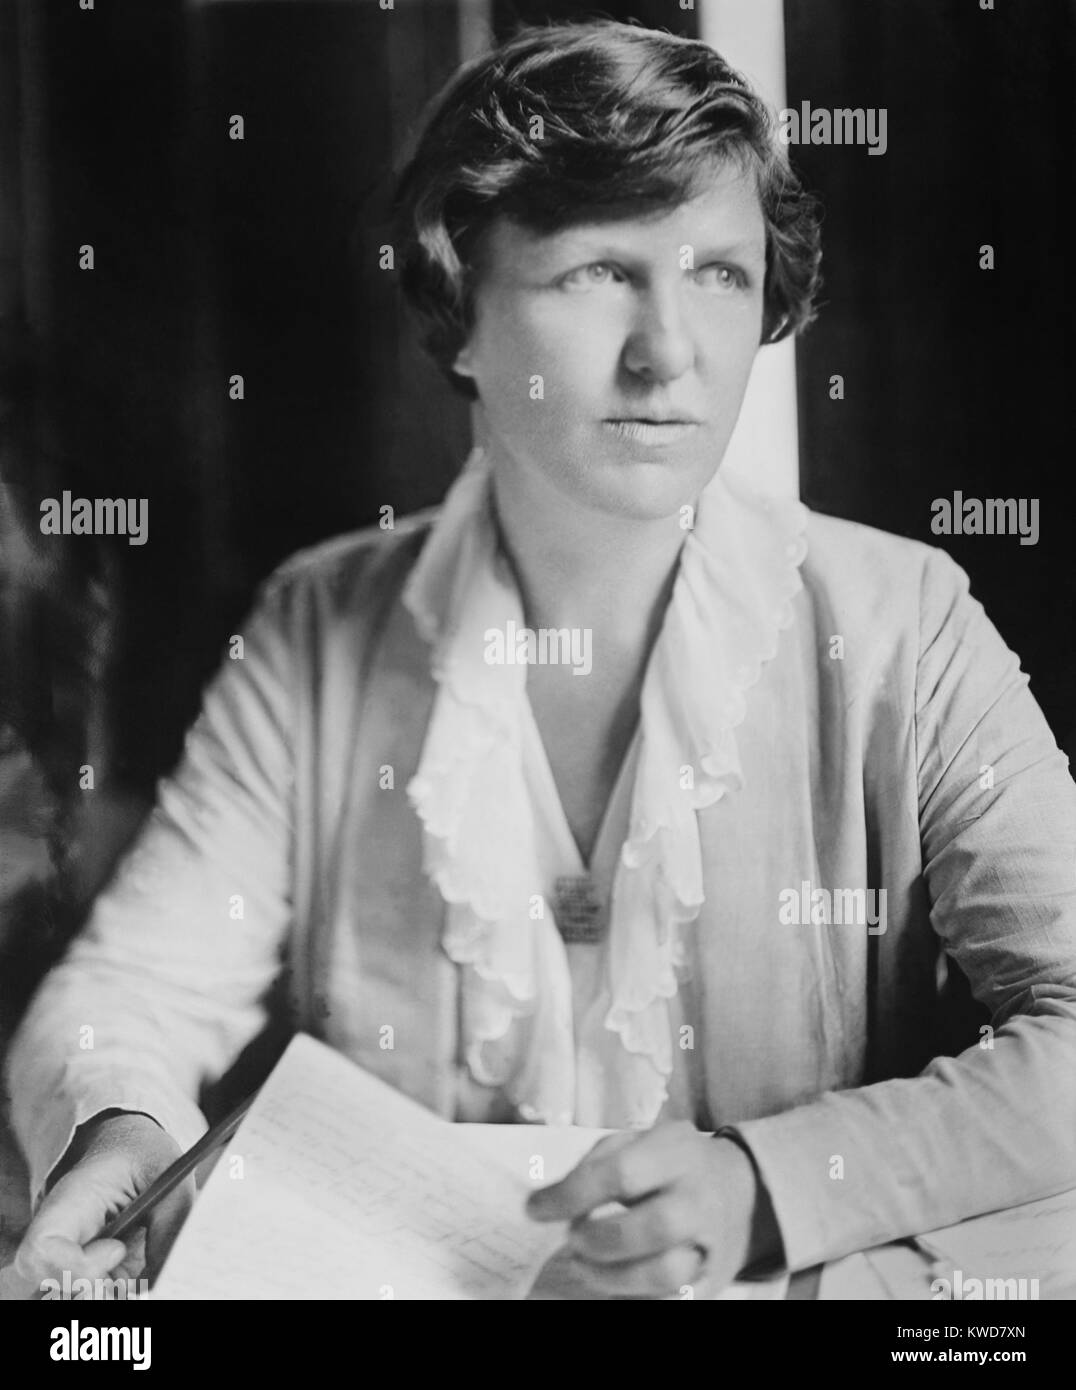 Elsie Hill, American Feminist, ca. 1920. She was an active suffragist from 1913 to 1920, planning major marches and arrested twice for speaking and picketing. After 1920 she was active in the National Women's Party's drive for an Equal Rights Amendment for Women. (BSLOC 2015 16 202) Stock Photo